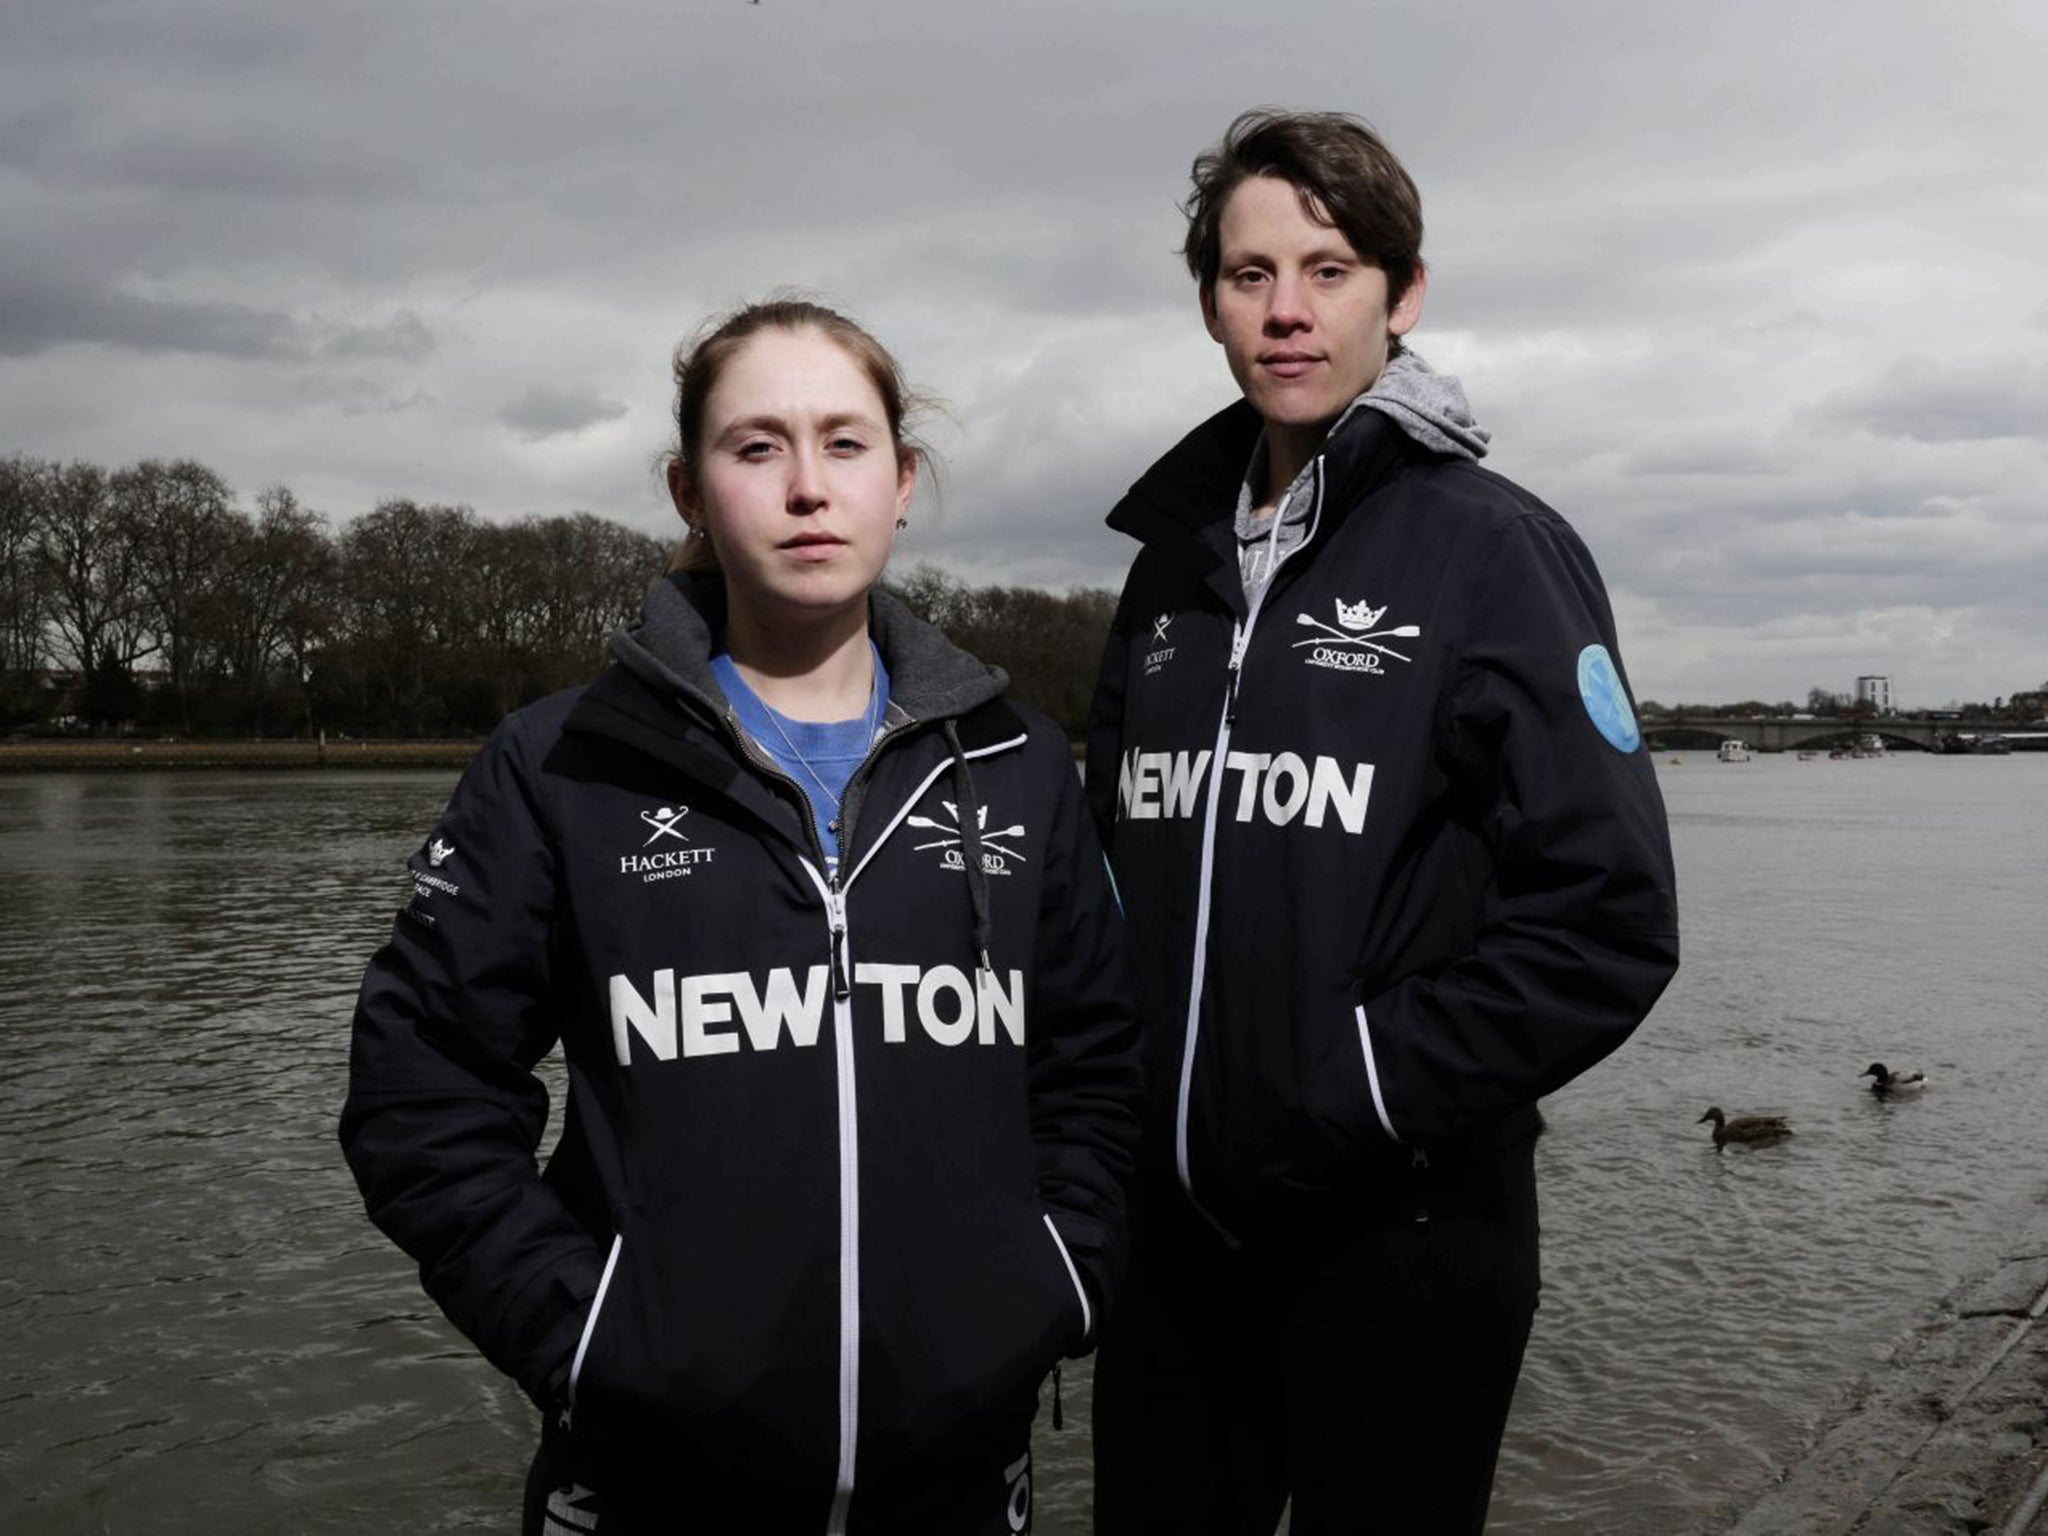 Maddy Badcott, left, and Caryn Davies will participate in the first women’s Boat Race to be held on the same day, and same course, as the men’s event